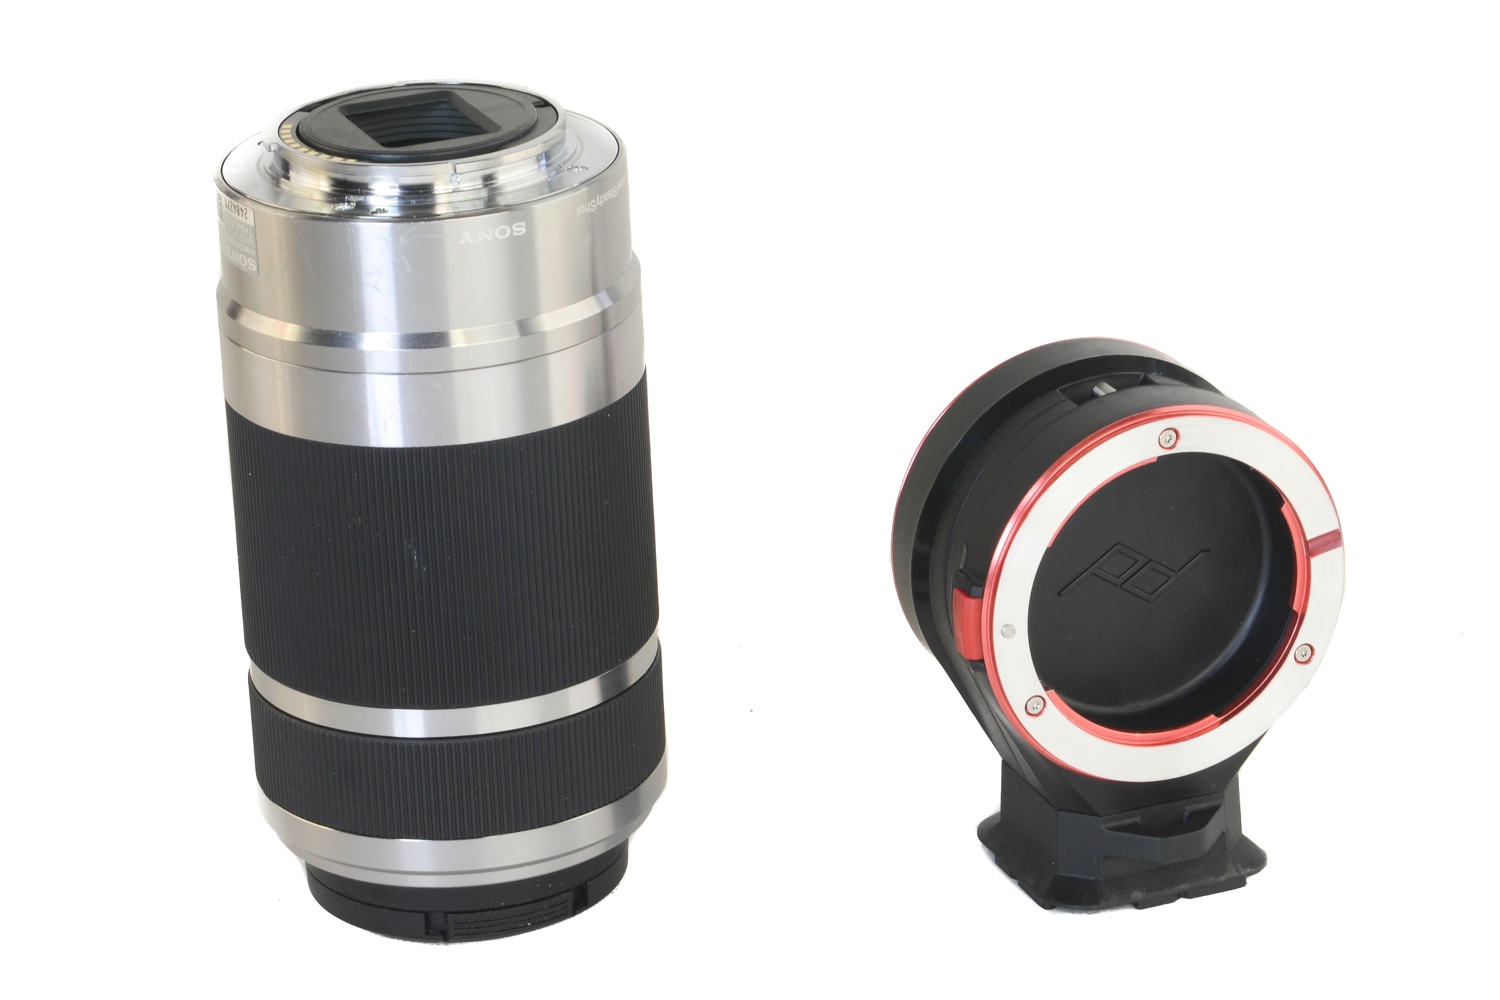 swapping lenses no longer a hassle with peak designs new accessory design capturelens 7